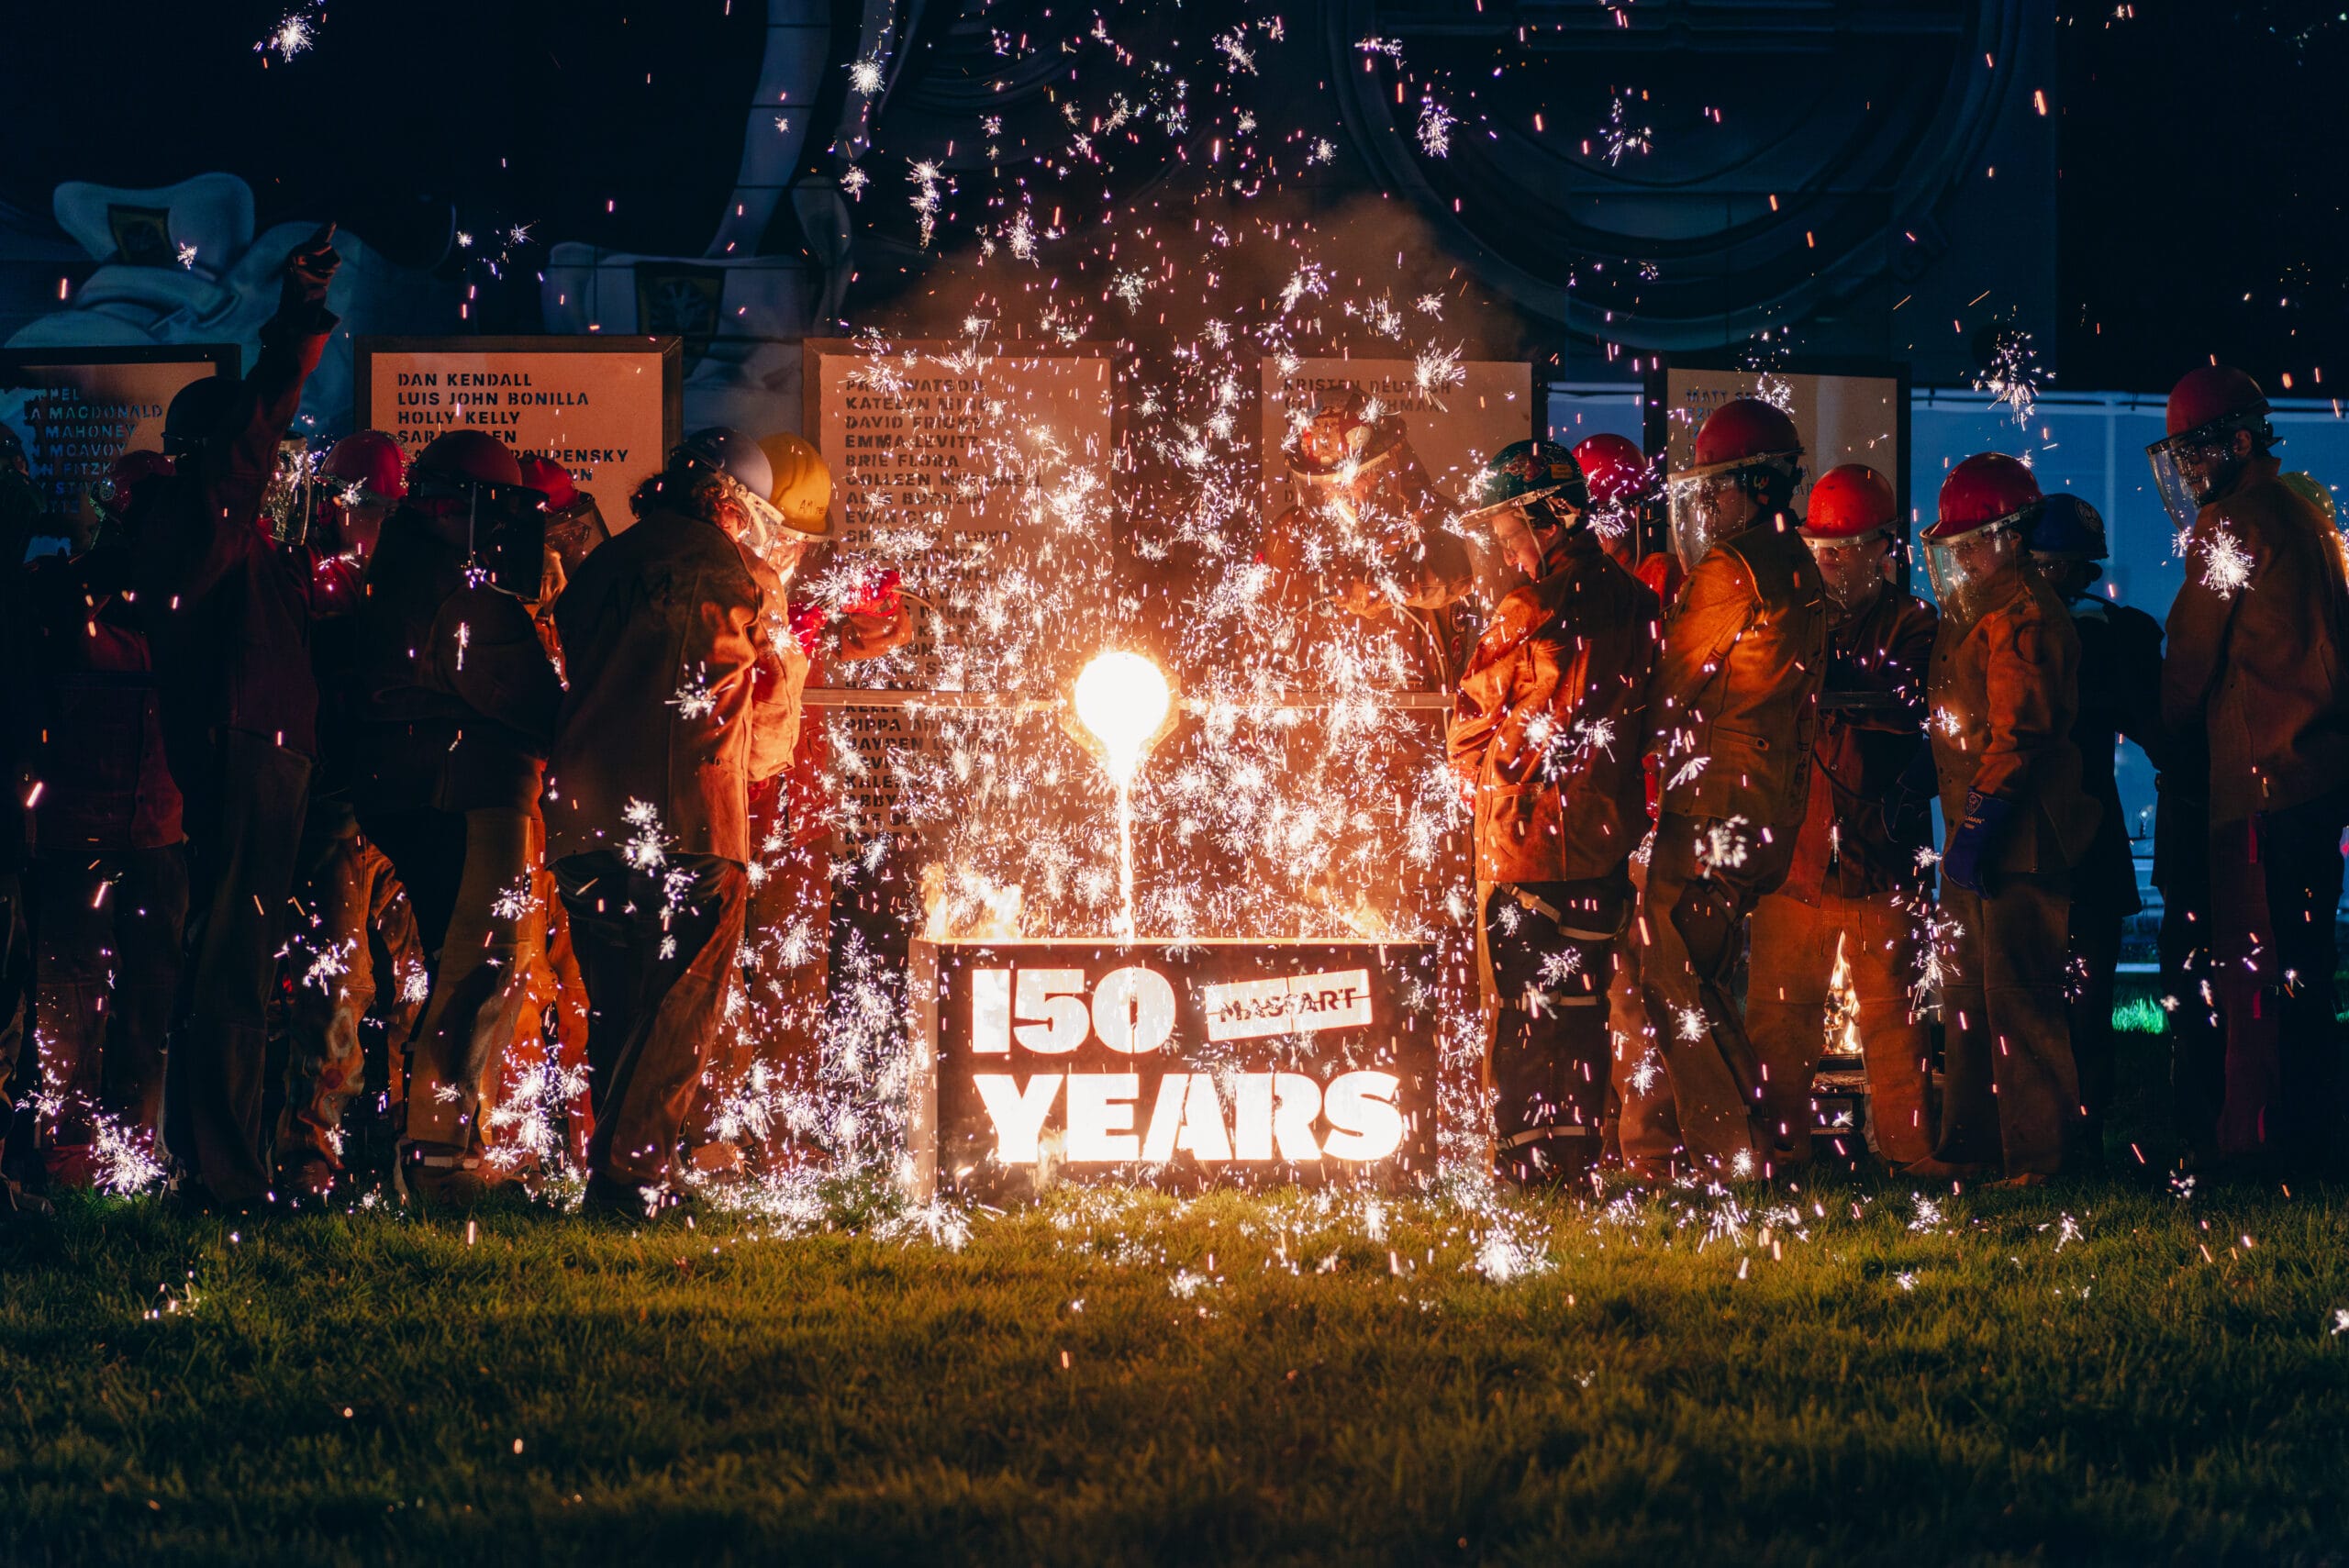 MassArt 150 Years logo is cut out of a metal box and iron corps alumni pour molten iron into sending sparks flying in the air.